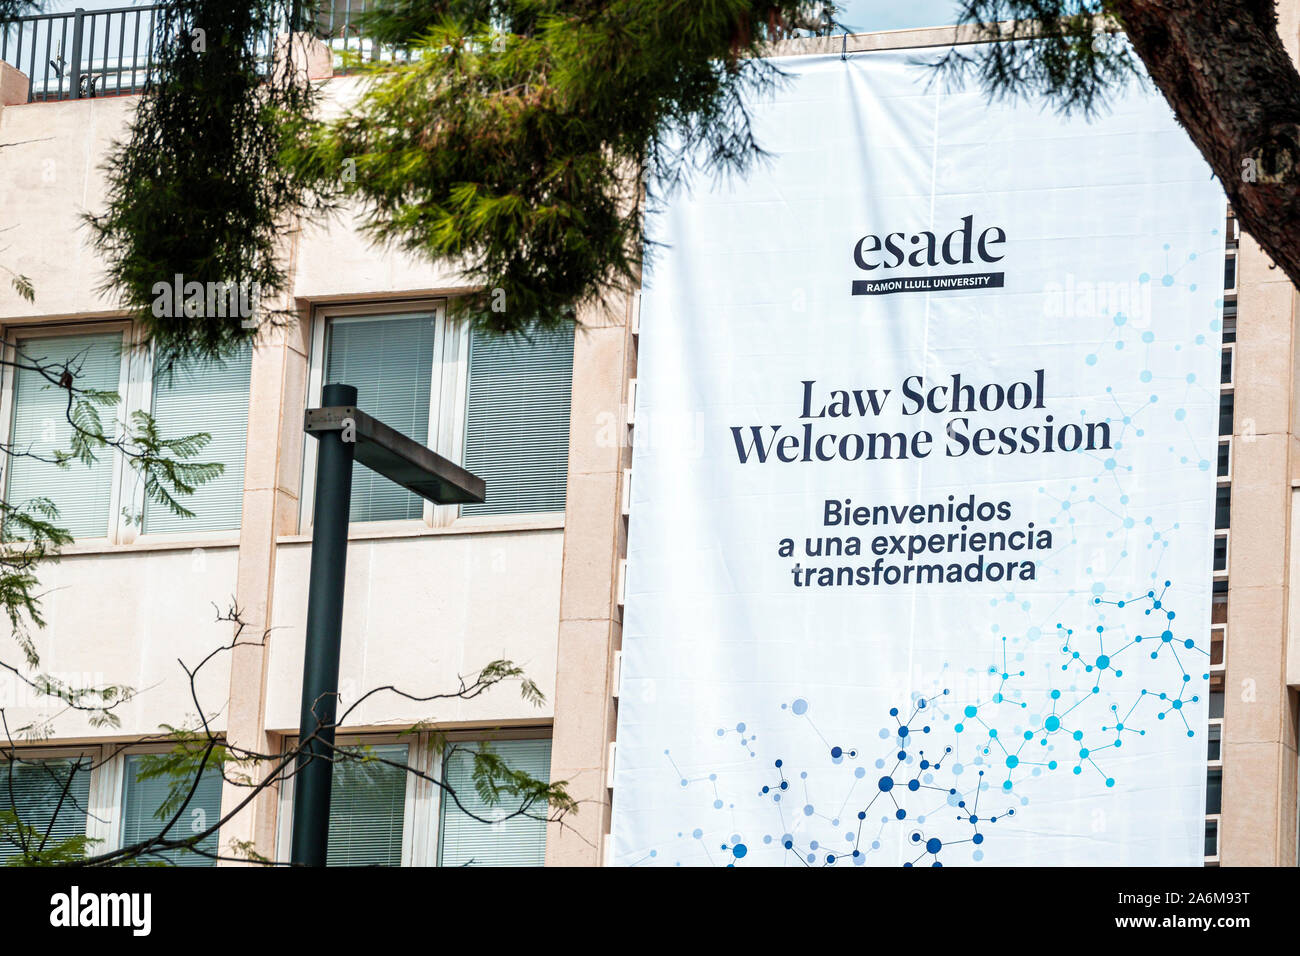 Barcelona Spain,Catalonia Pedralbes,Ramon Llull University,private college,ESADE campus building,Law School,welcome session sign,ES190901065 Stock Photo